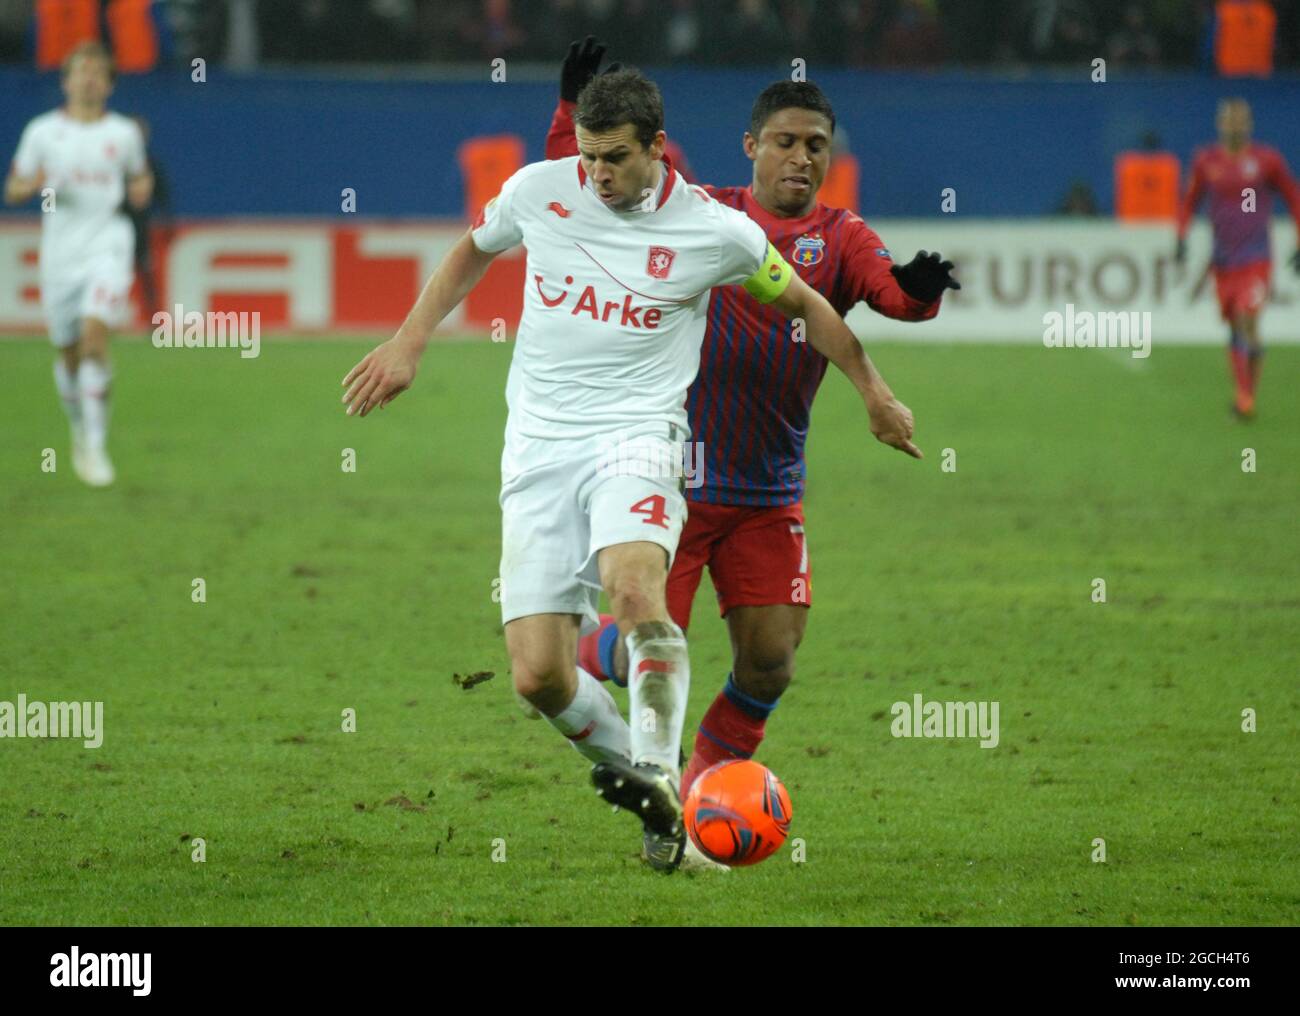 BUCHAREST, ROMANIA - FEBRUARY 16, 2012: Peter Wisgerhof (L) of Twente and Leandro Tatu (R) of FCSB pictured in action during the first leg of the 2011/12 UEFA Europa League Round of 32 game between FCSB and FC Twente at National Arena. Stock Photo